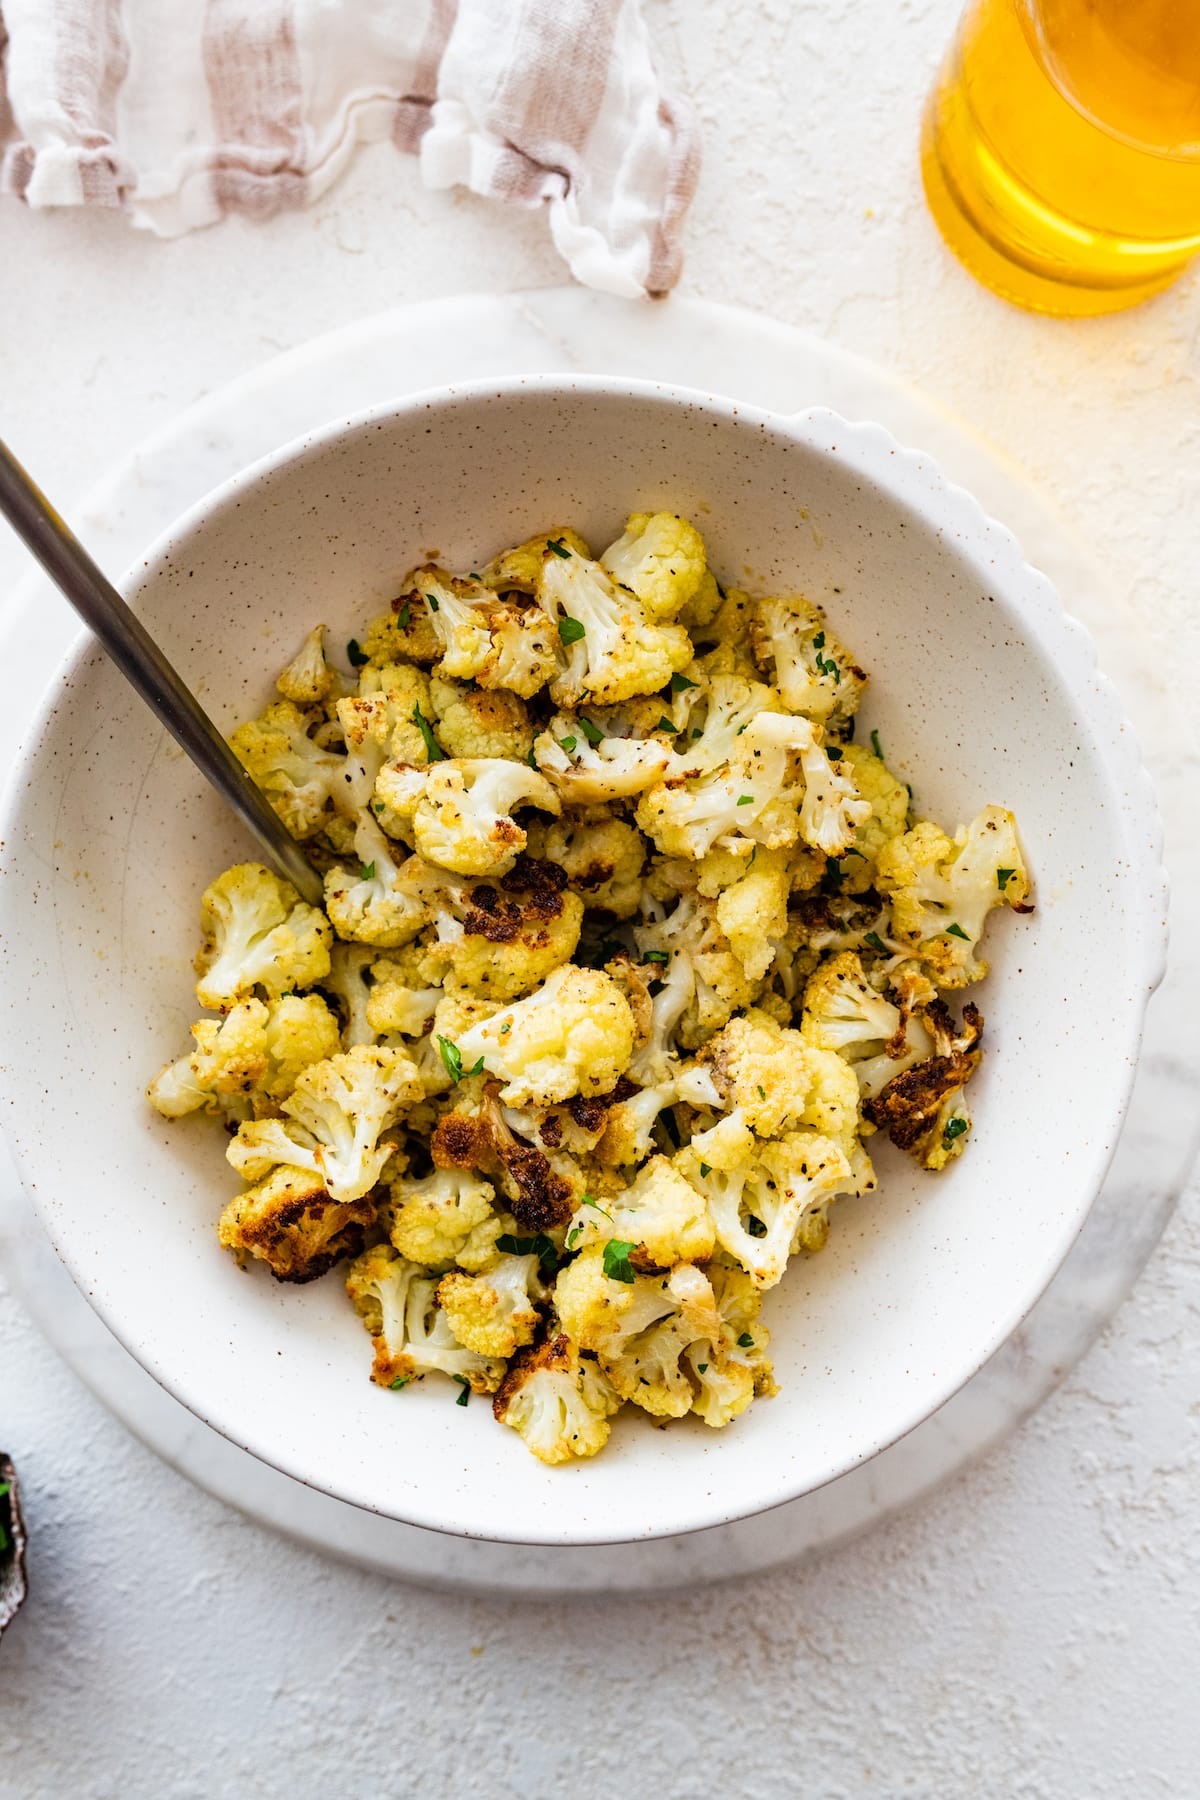 Roasted cauliflower in a white bowl with a metal serving spoon.